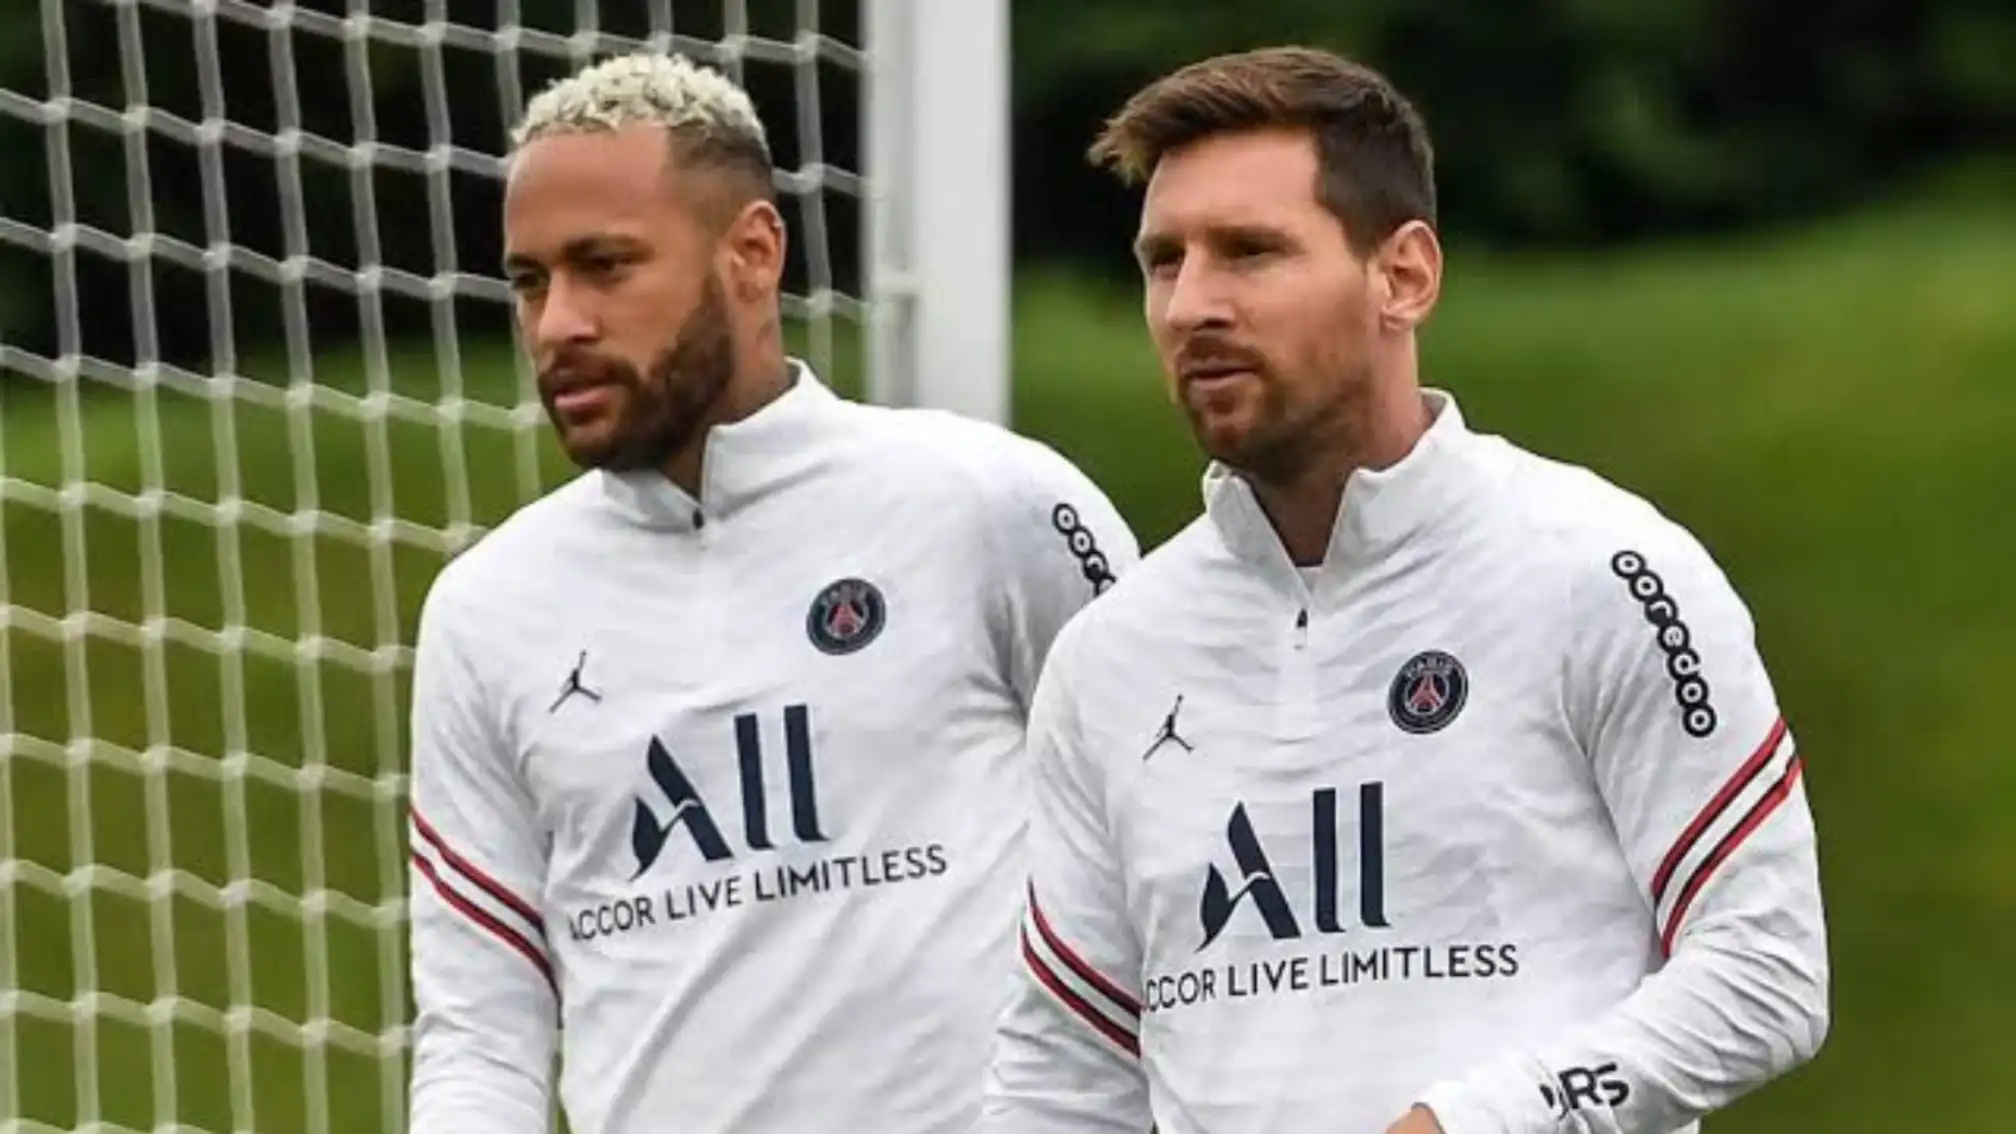 Report: Ligue 1 new salary rules could lead to Messi and Neymar exits